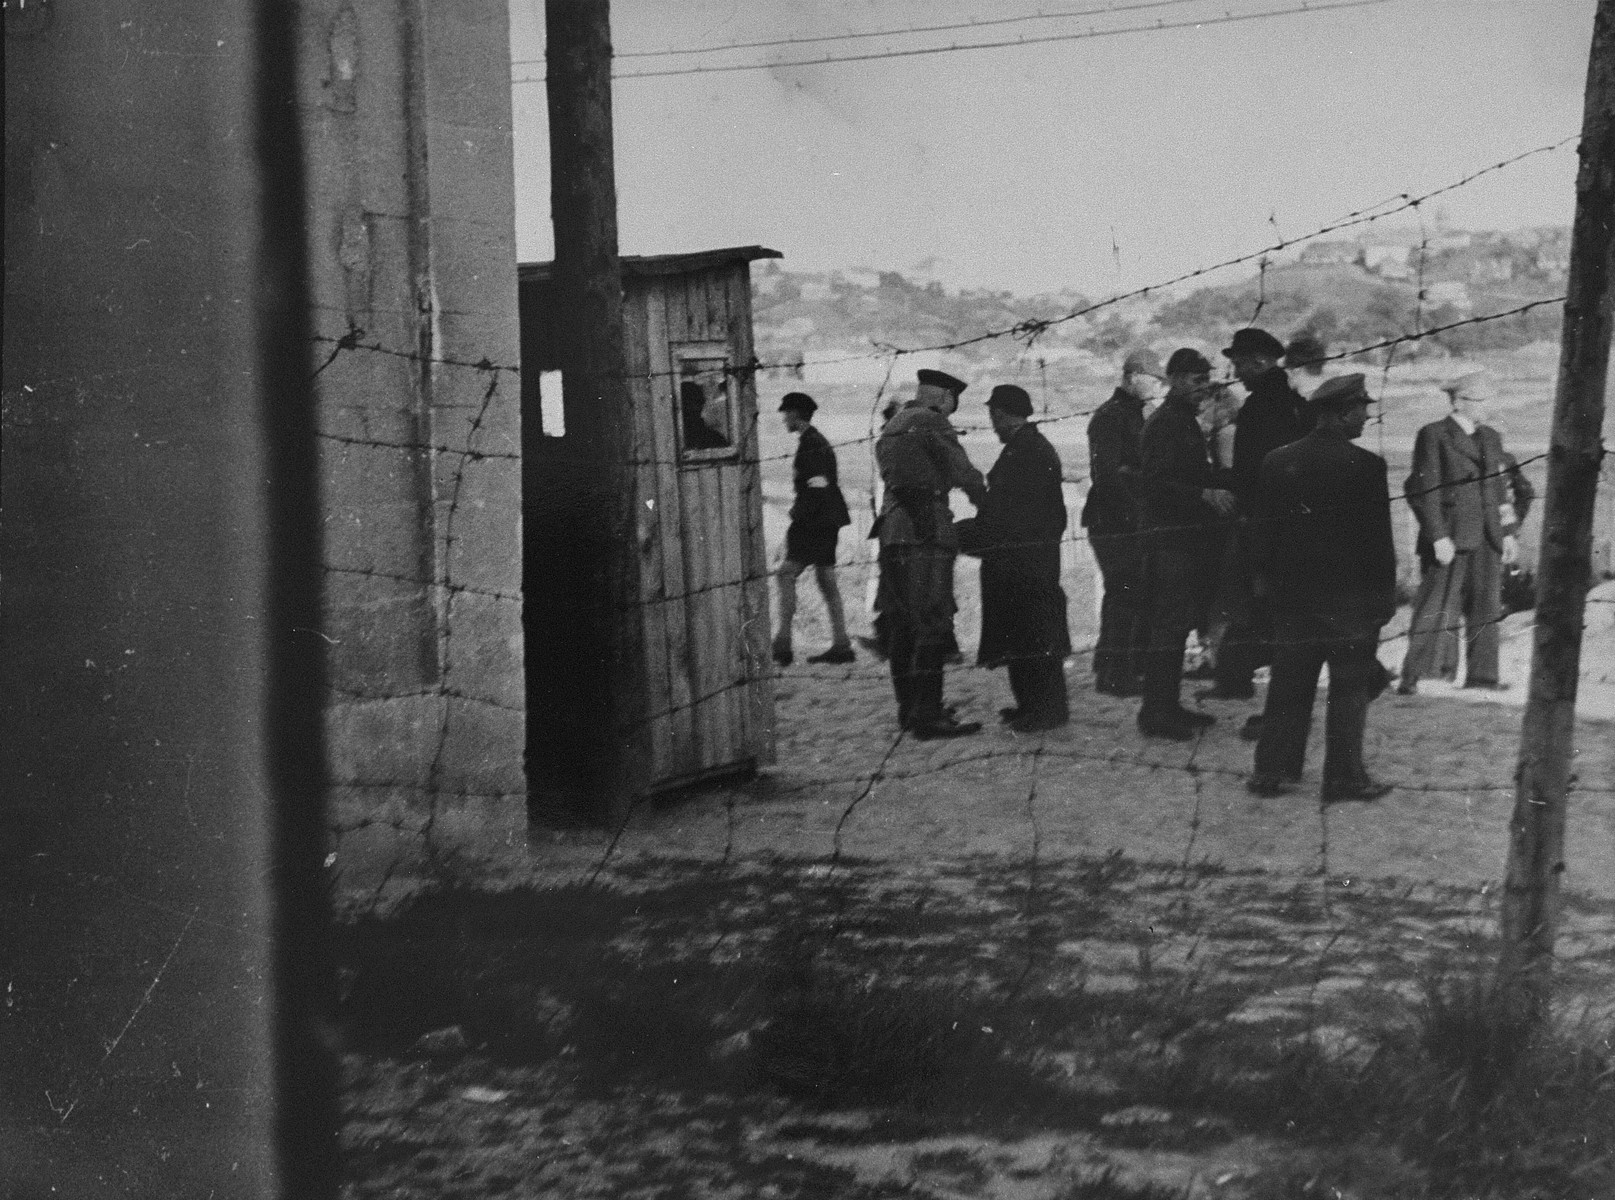 A group of Jews return to the ghetto after forced labor on the outside. German and Lithuanian guards search them as they enter. Jewish police stand among them.